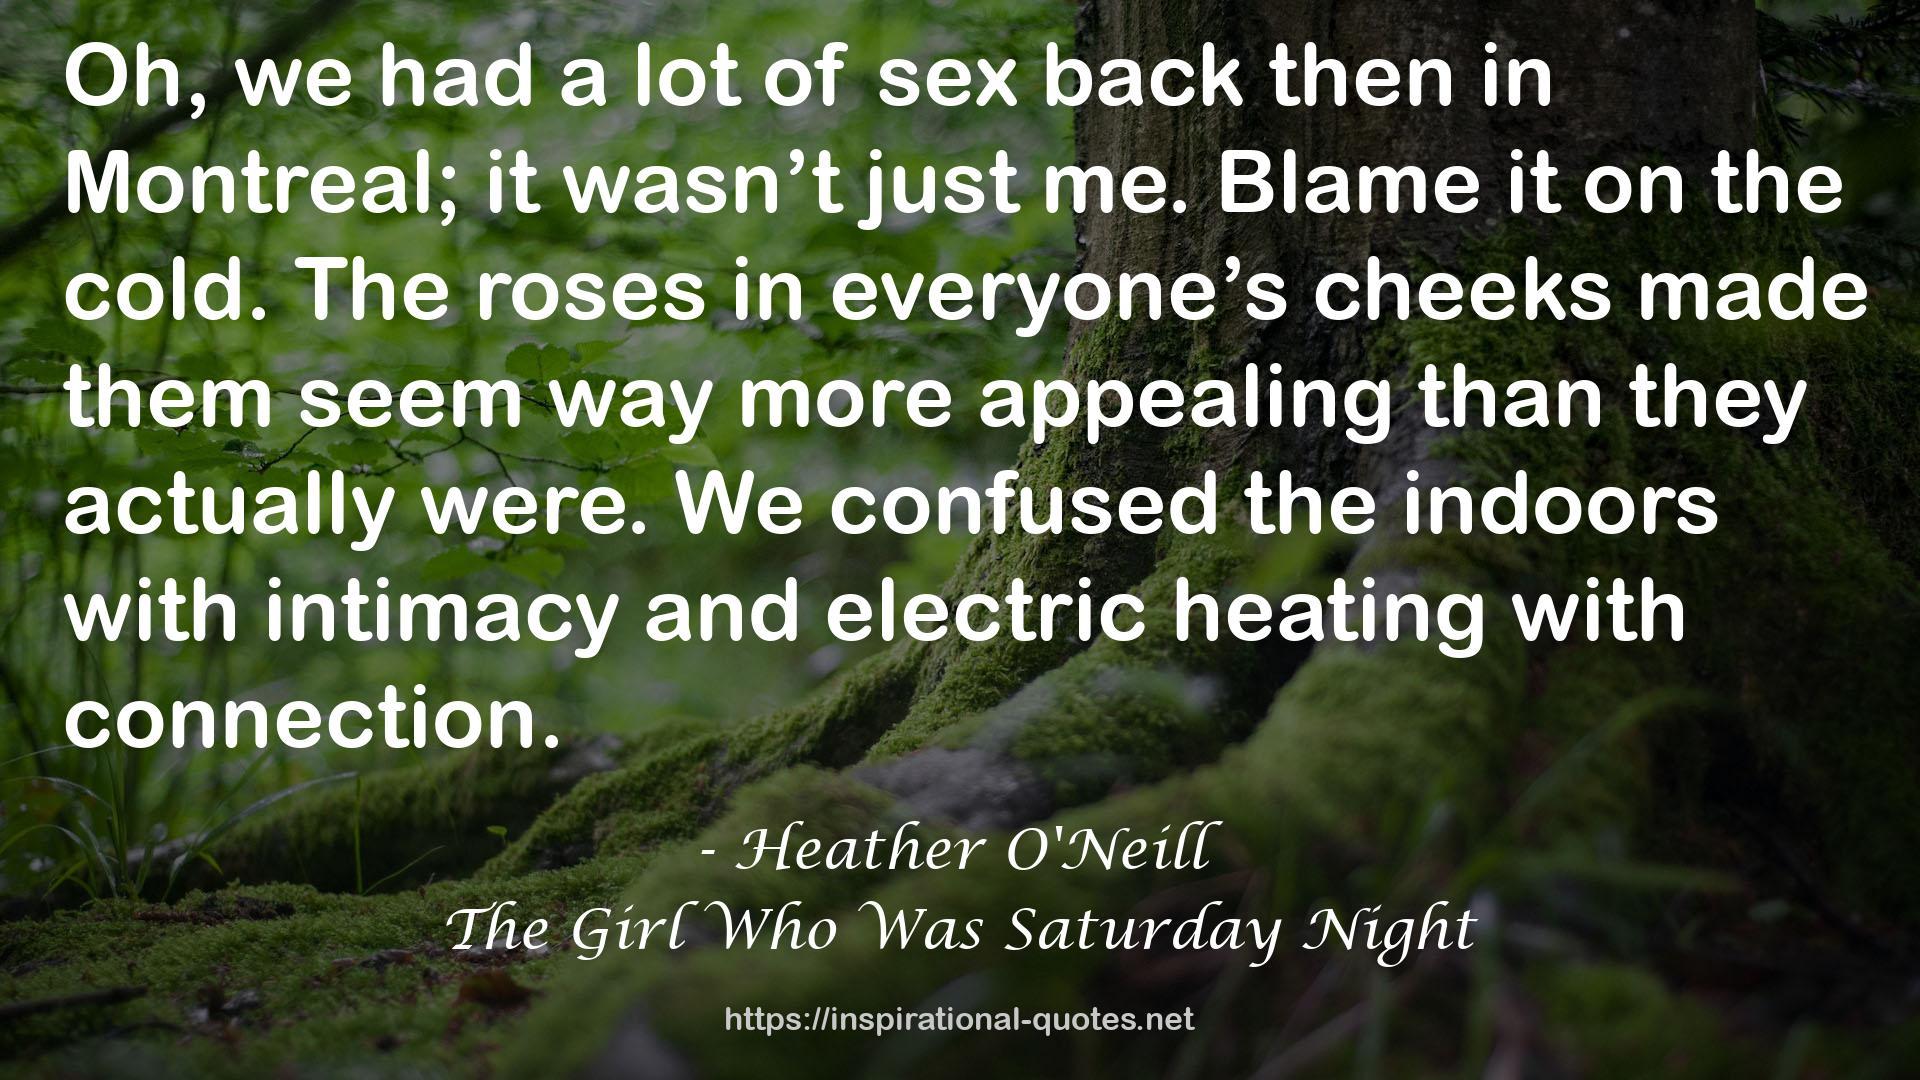 The Girl Who Was Saturday Night QUOTES